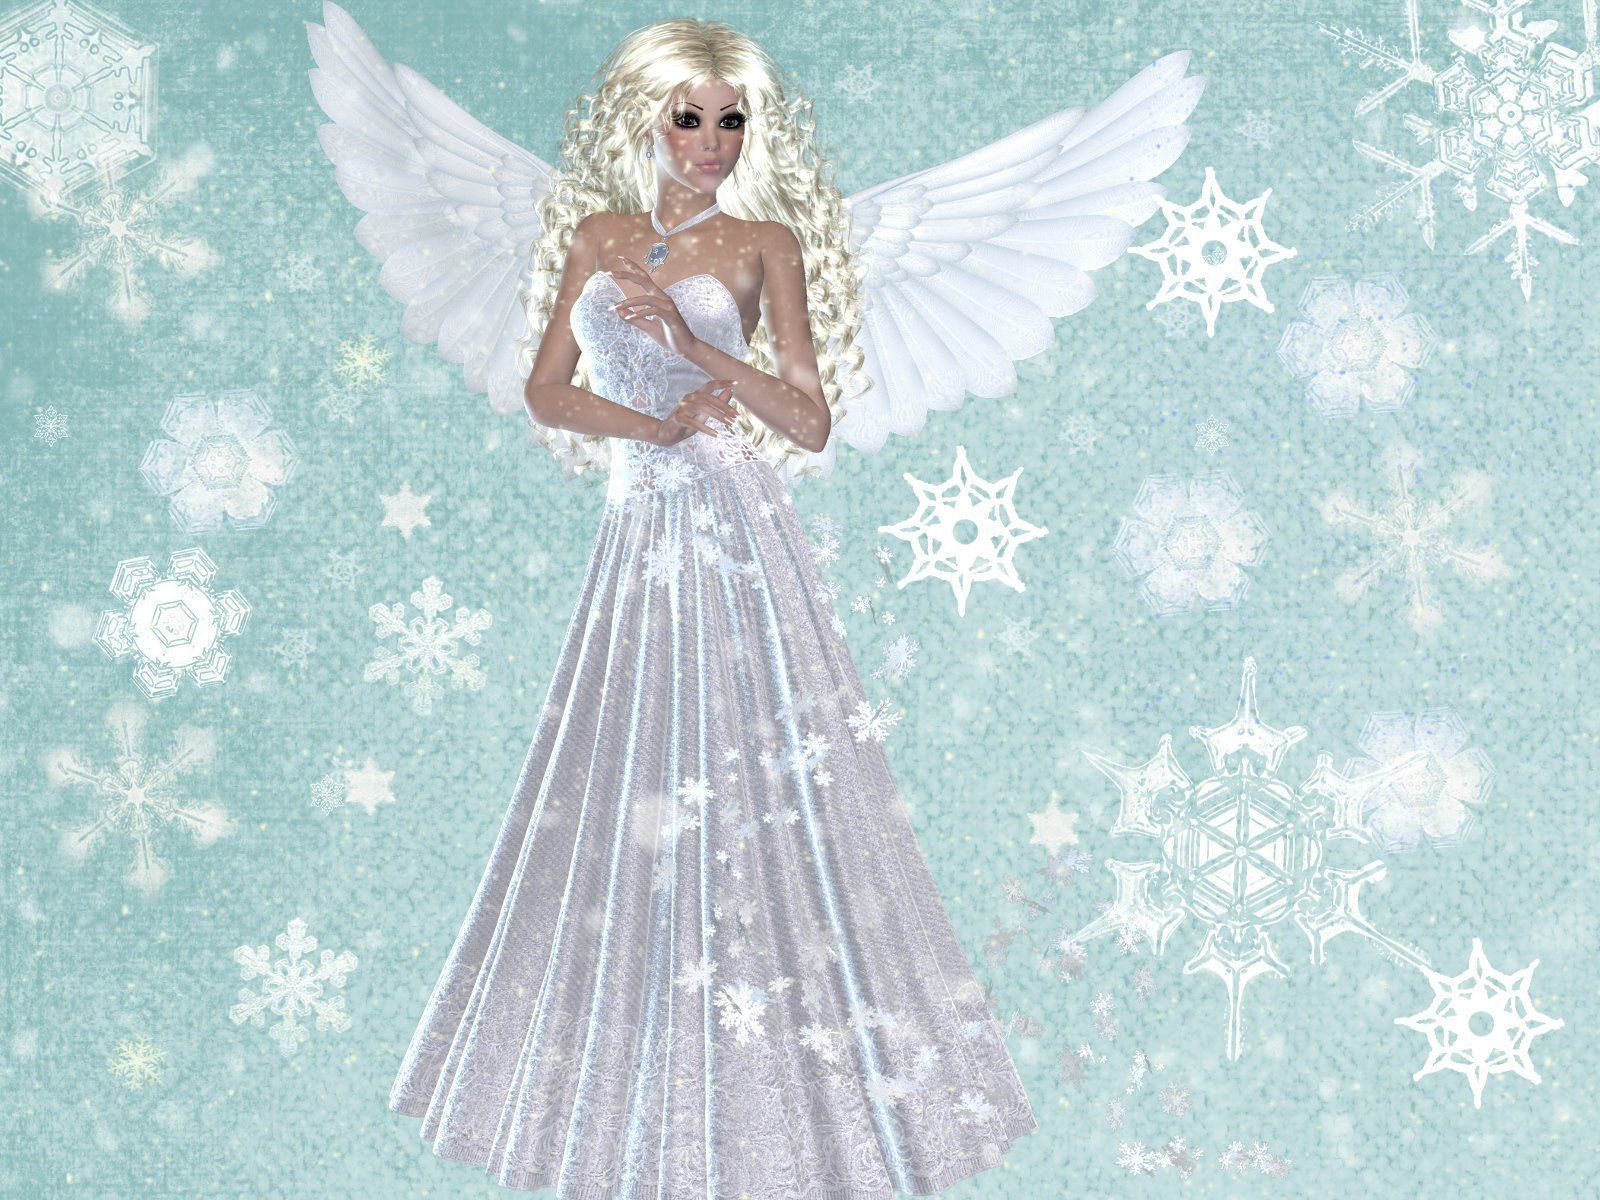 Angel Wallpaper Wallpaper. Angel wallpaper, Angel picture, Fairy angel